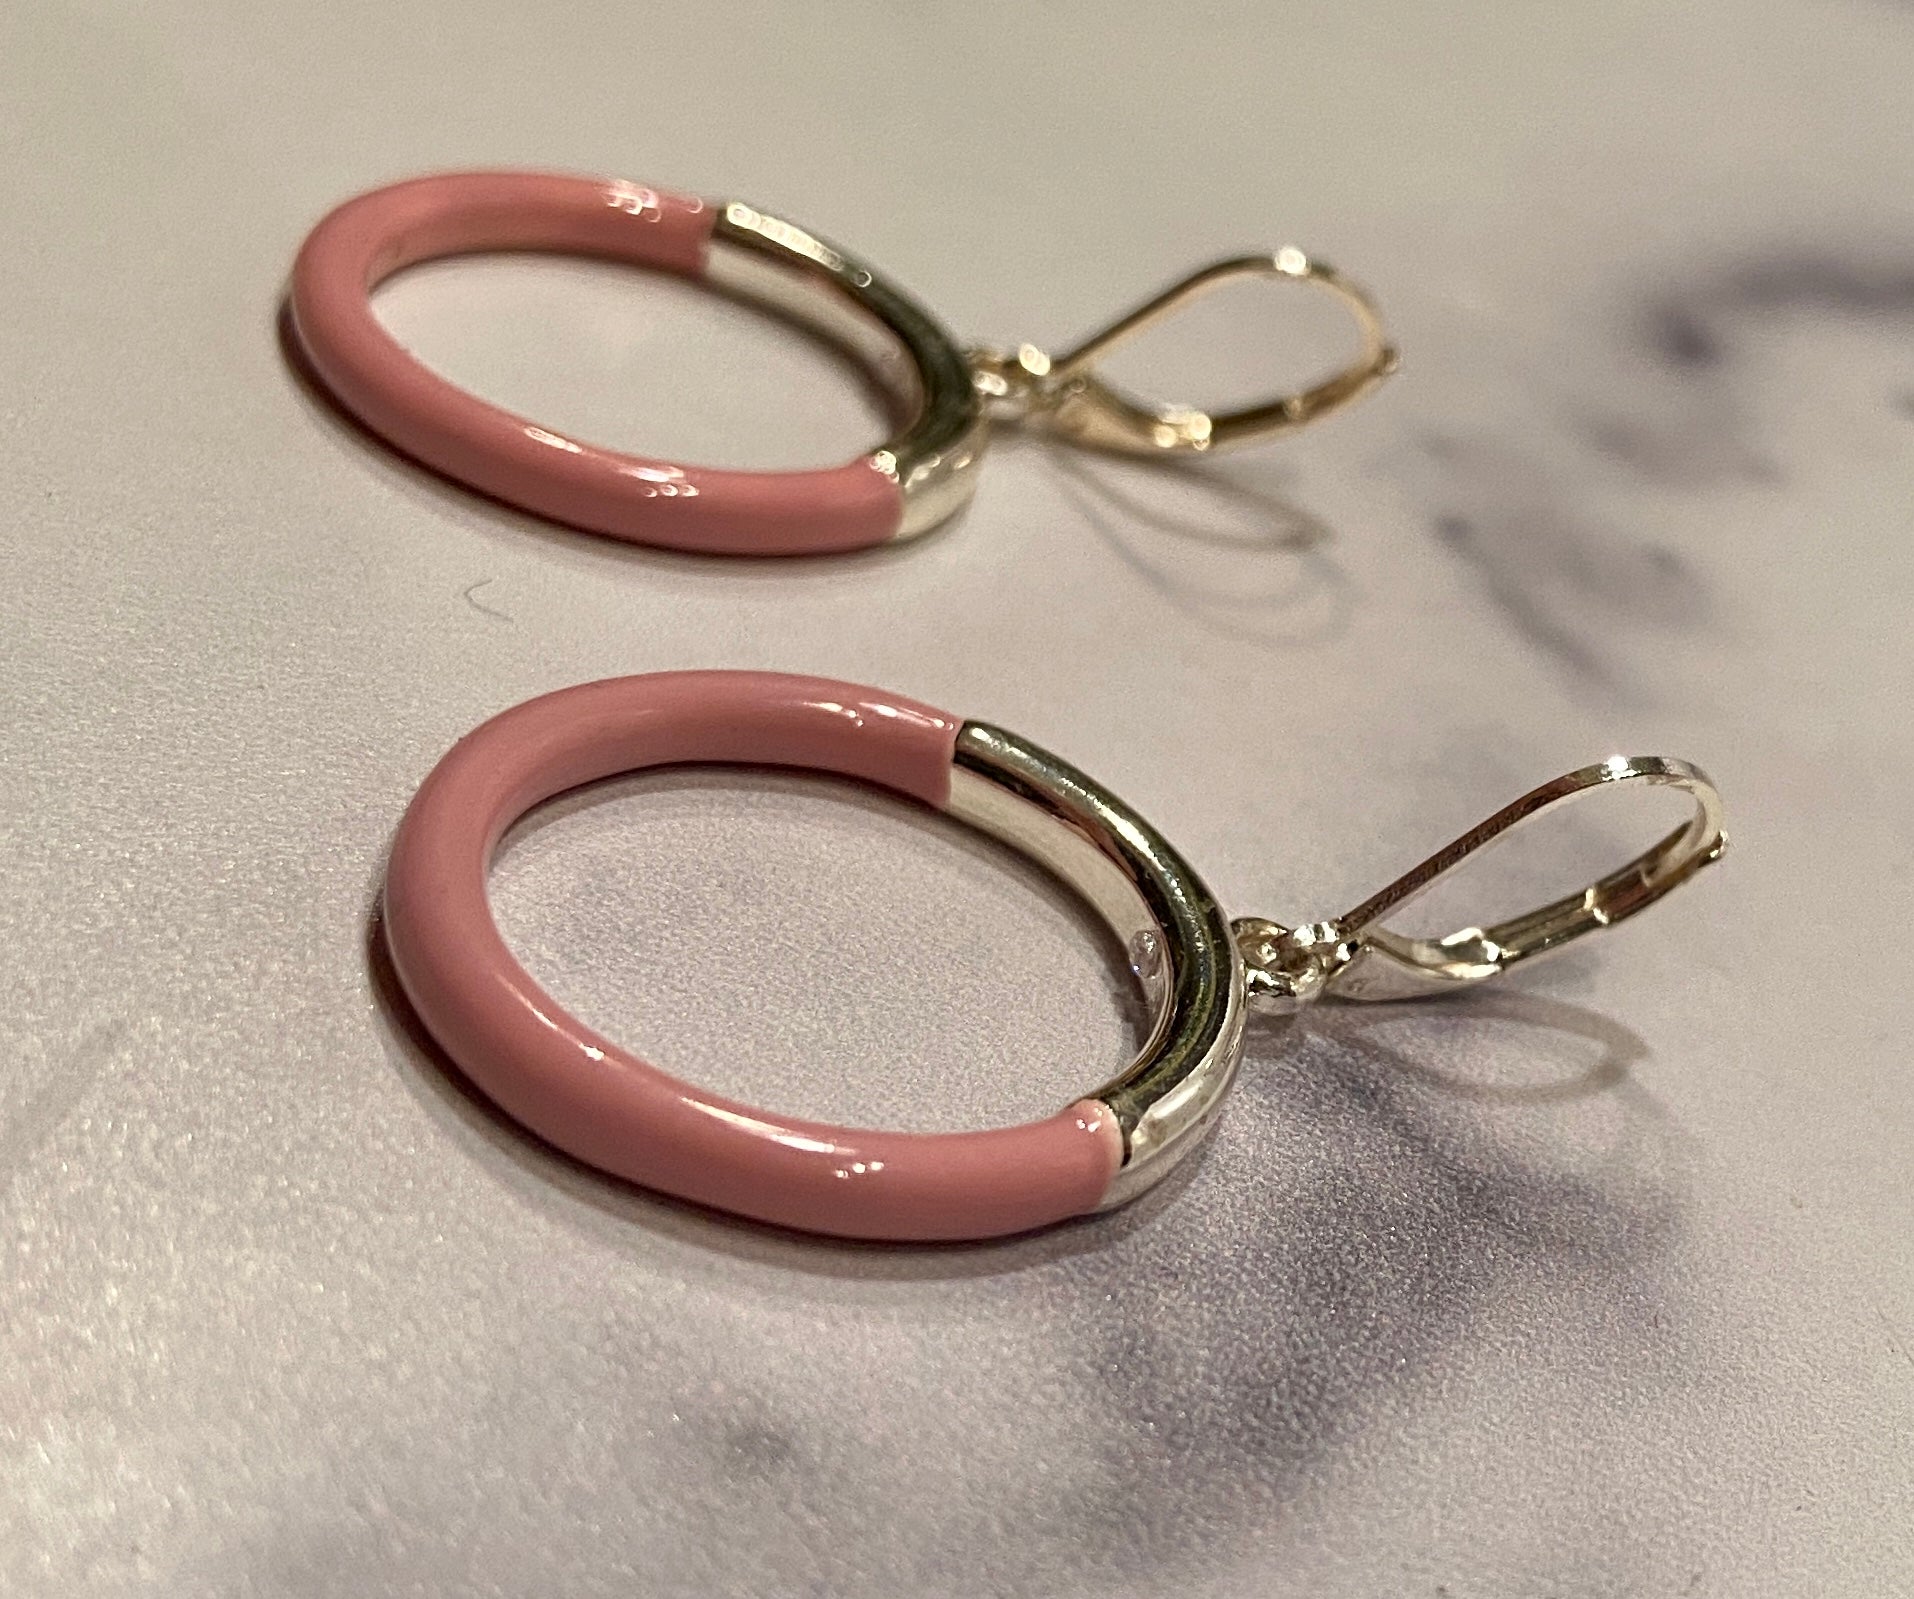 Pink and silver earrings